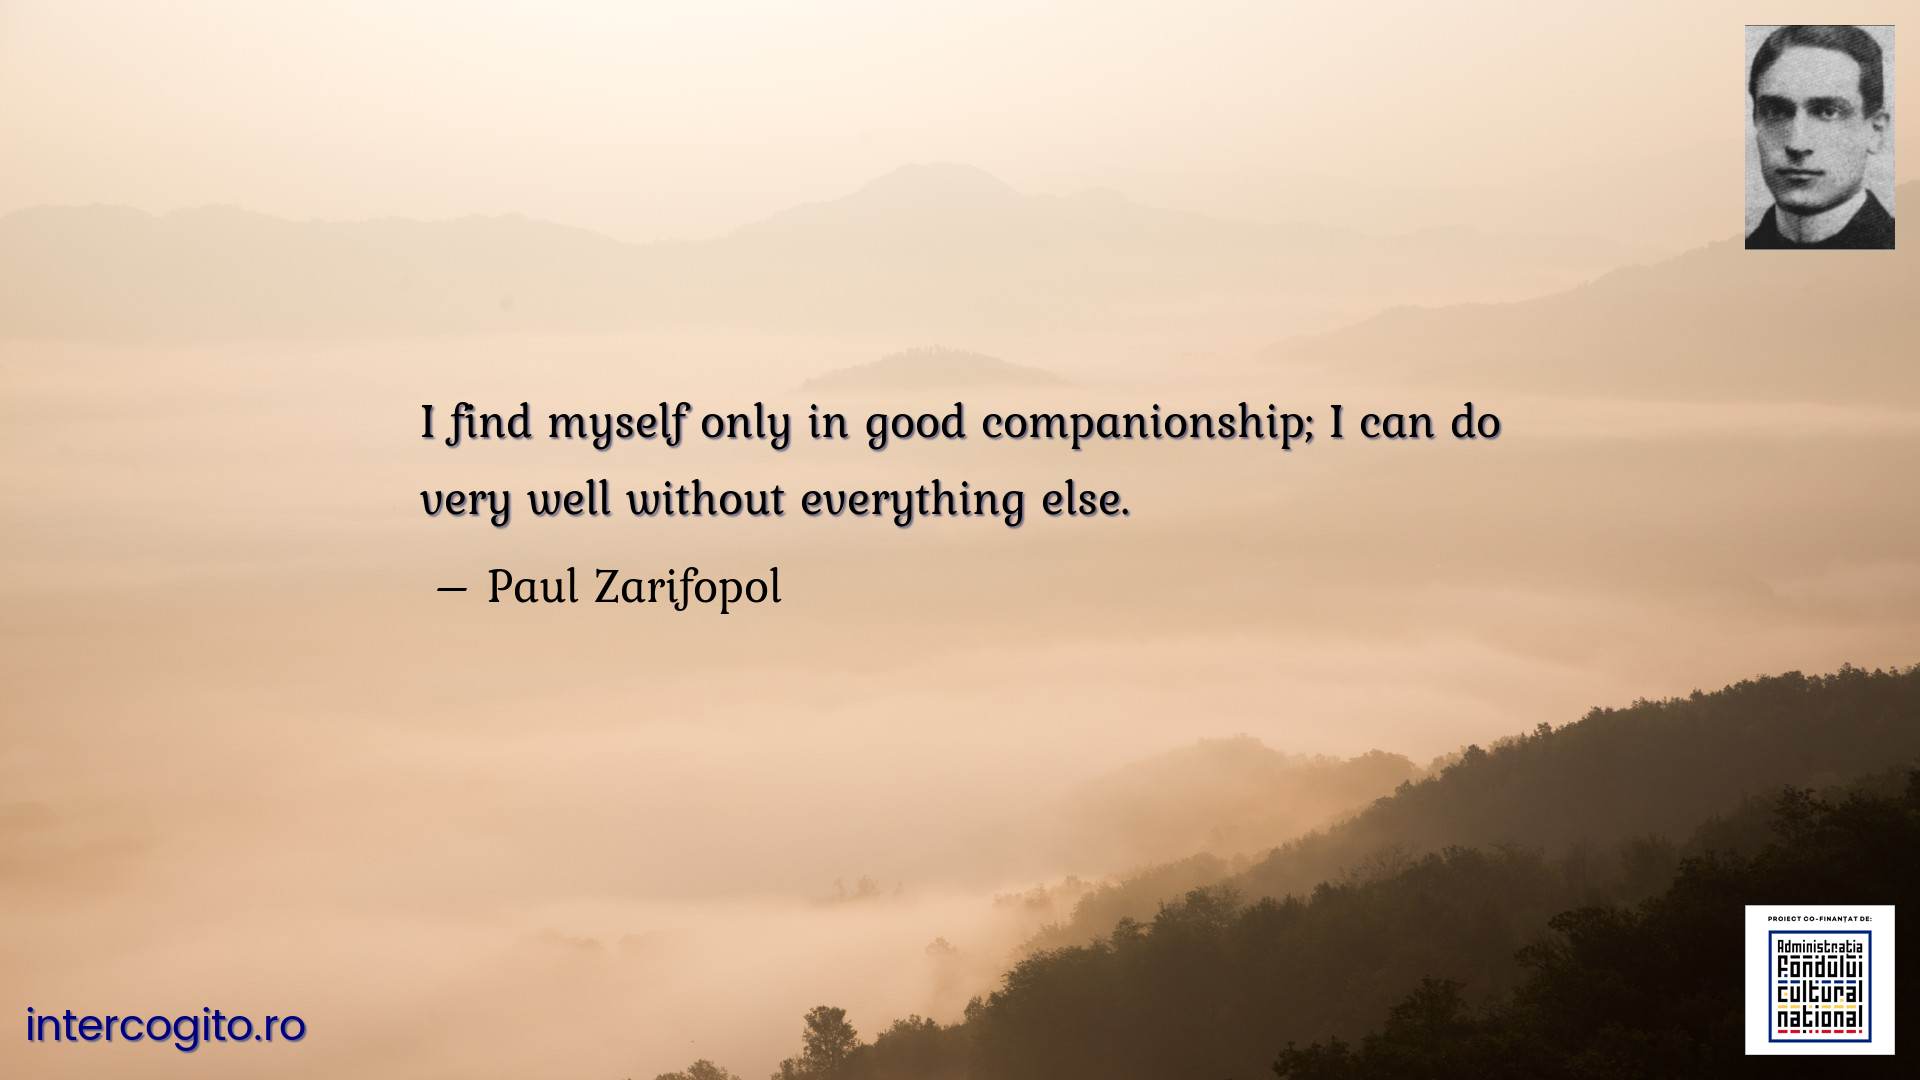 I find myself only in good companionship; I can do very well without everything else.